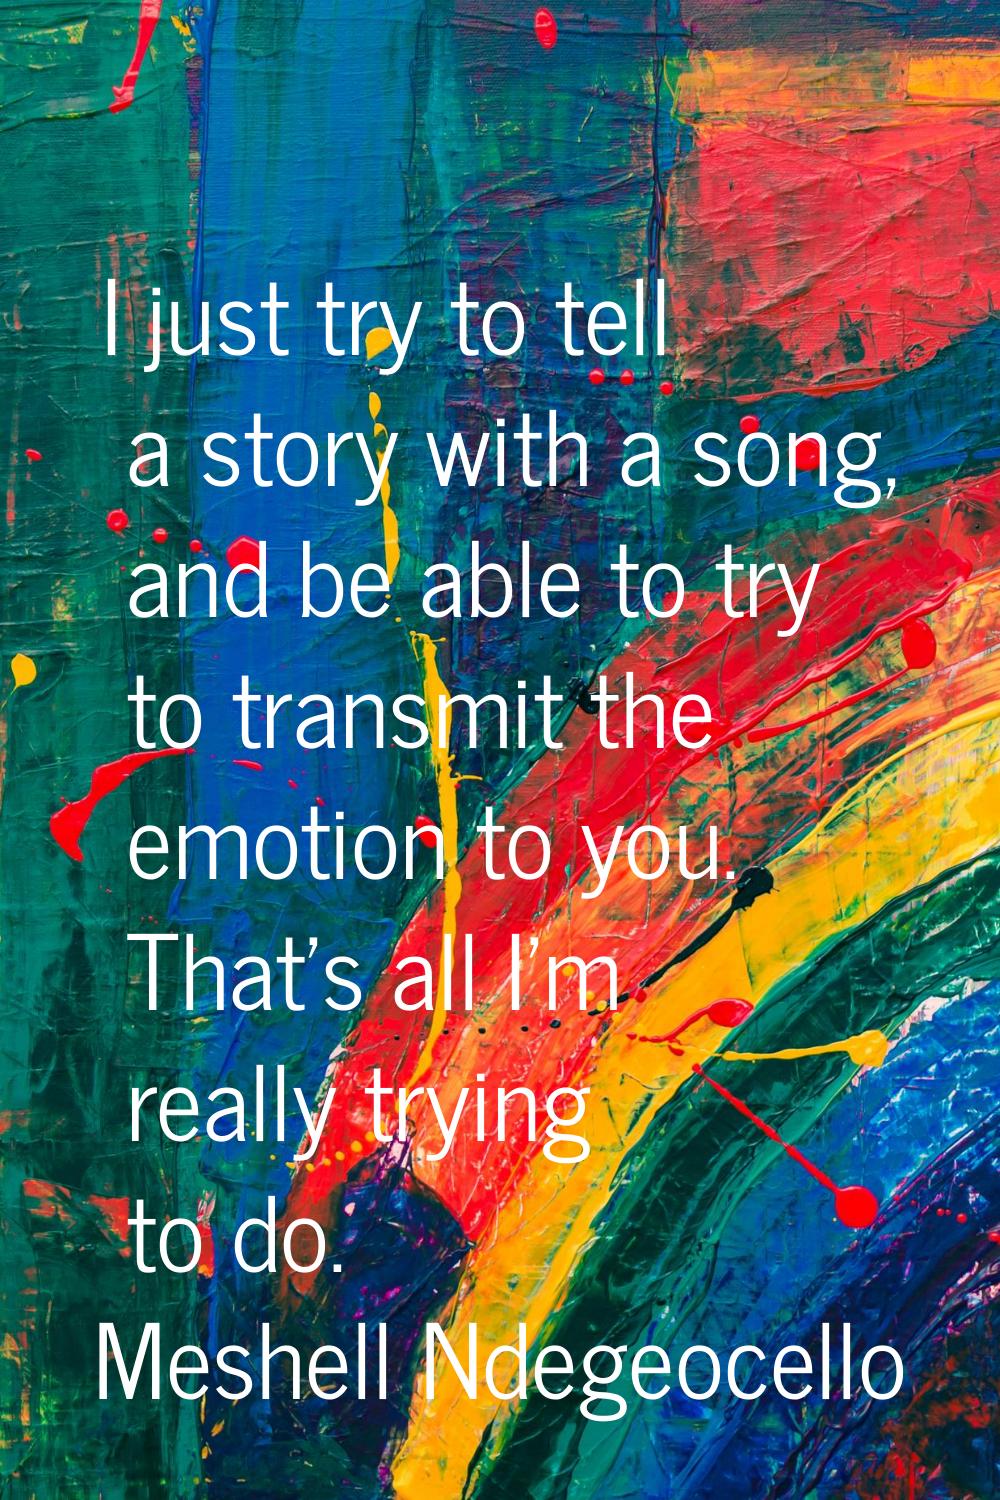 I just try to tell a story with a song, and be able to try to transmit the emotion to you. That's a